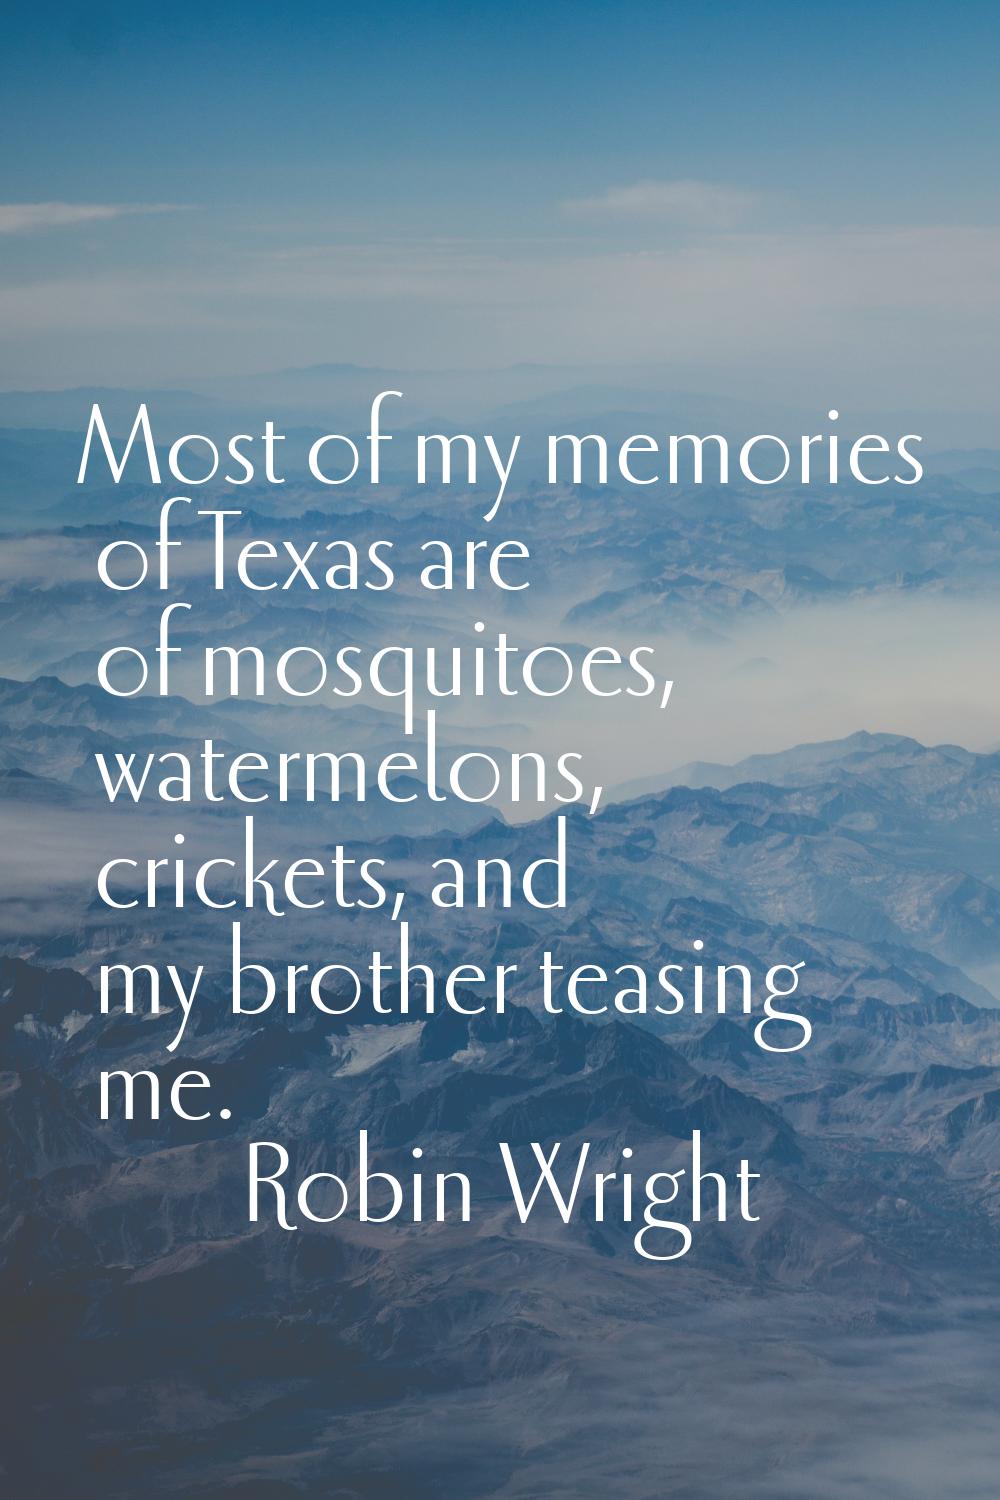 Most of my memories of Texas are of mosquitoes, watermelons, crickets, and my brother teasing me.